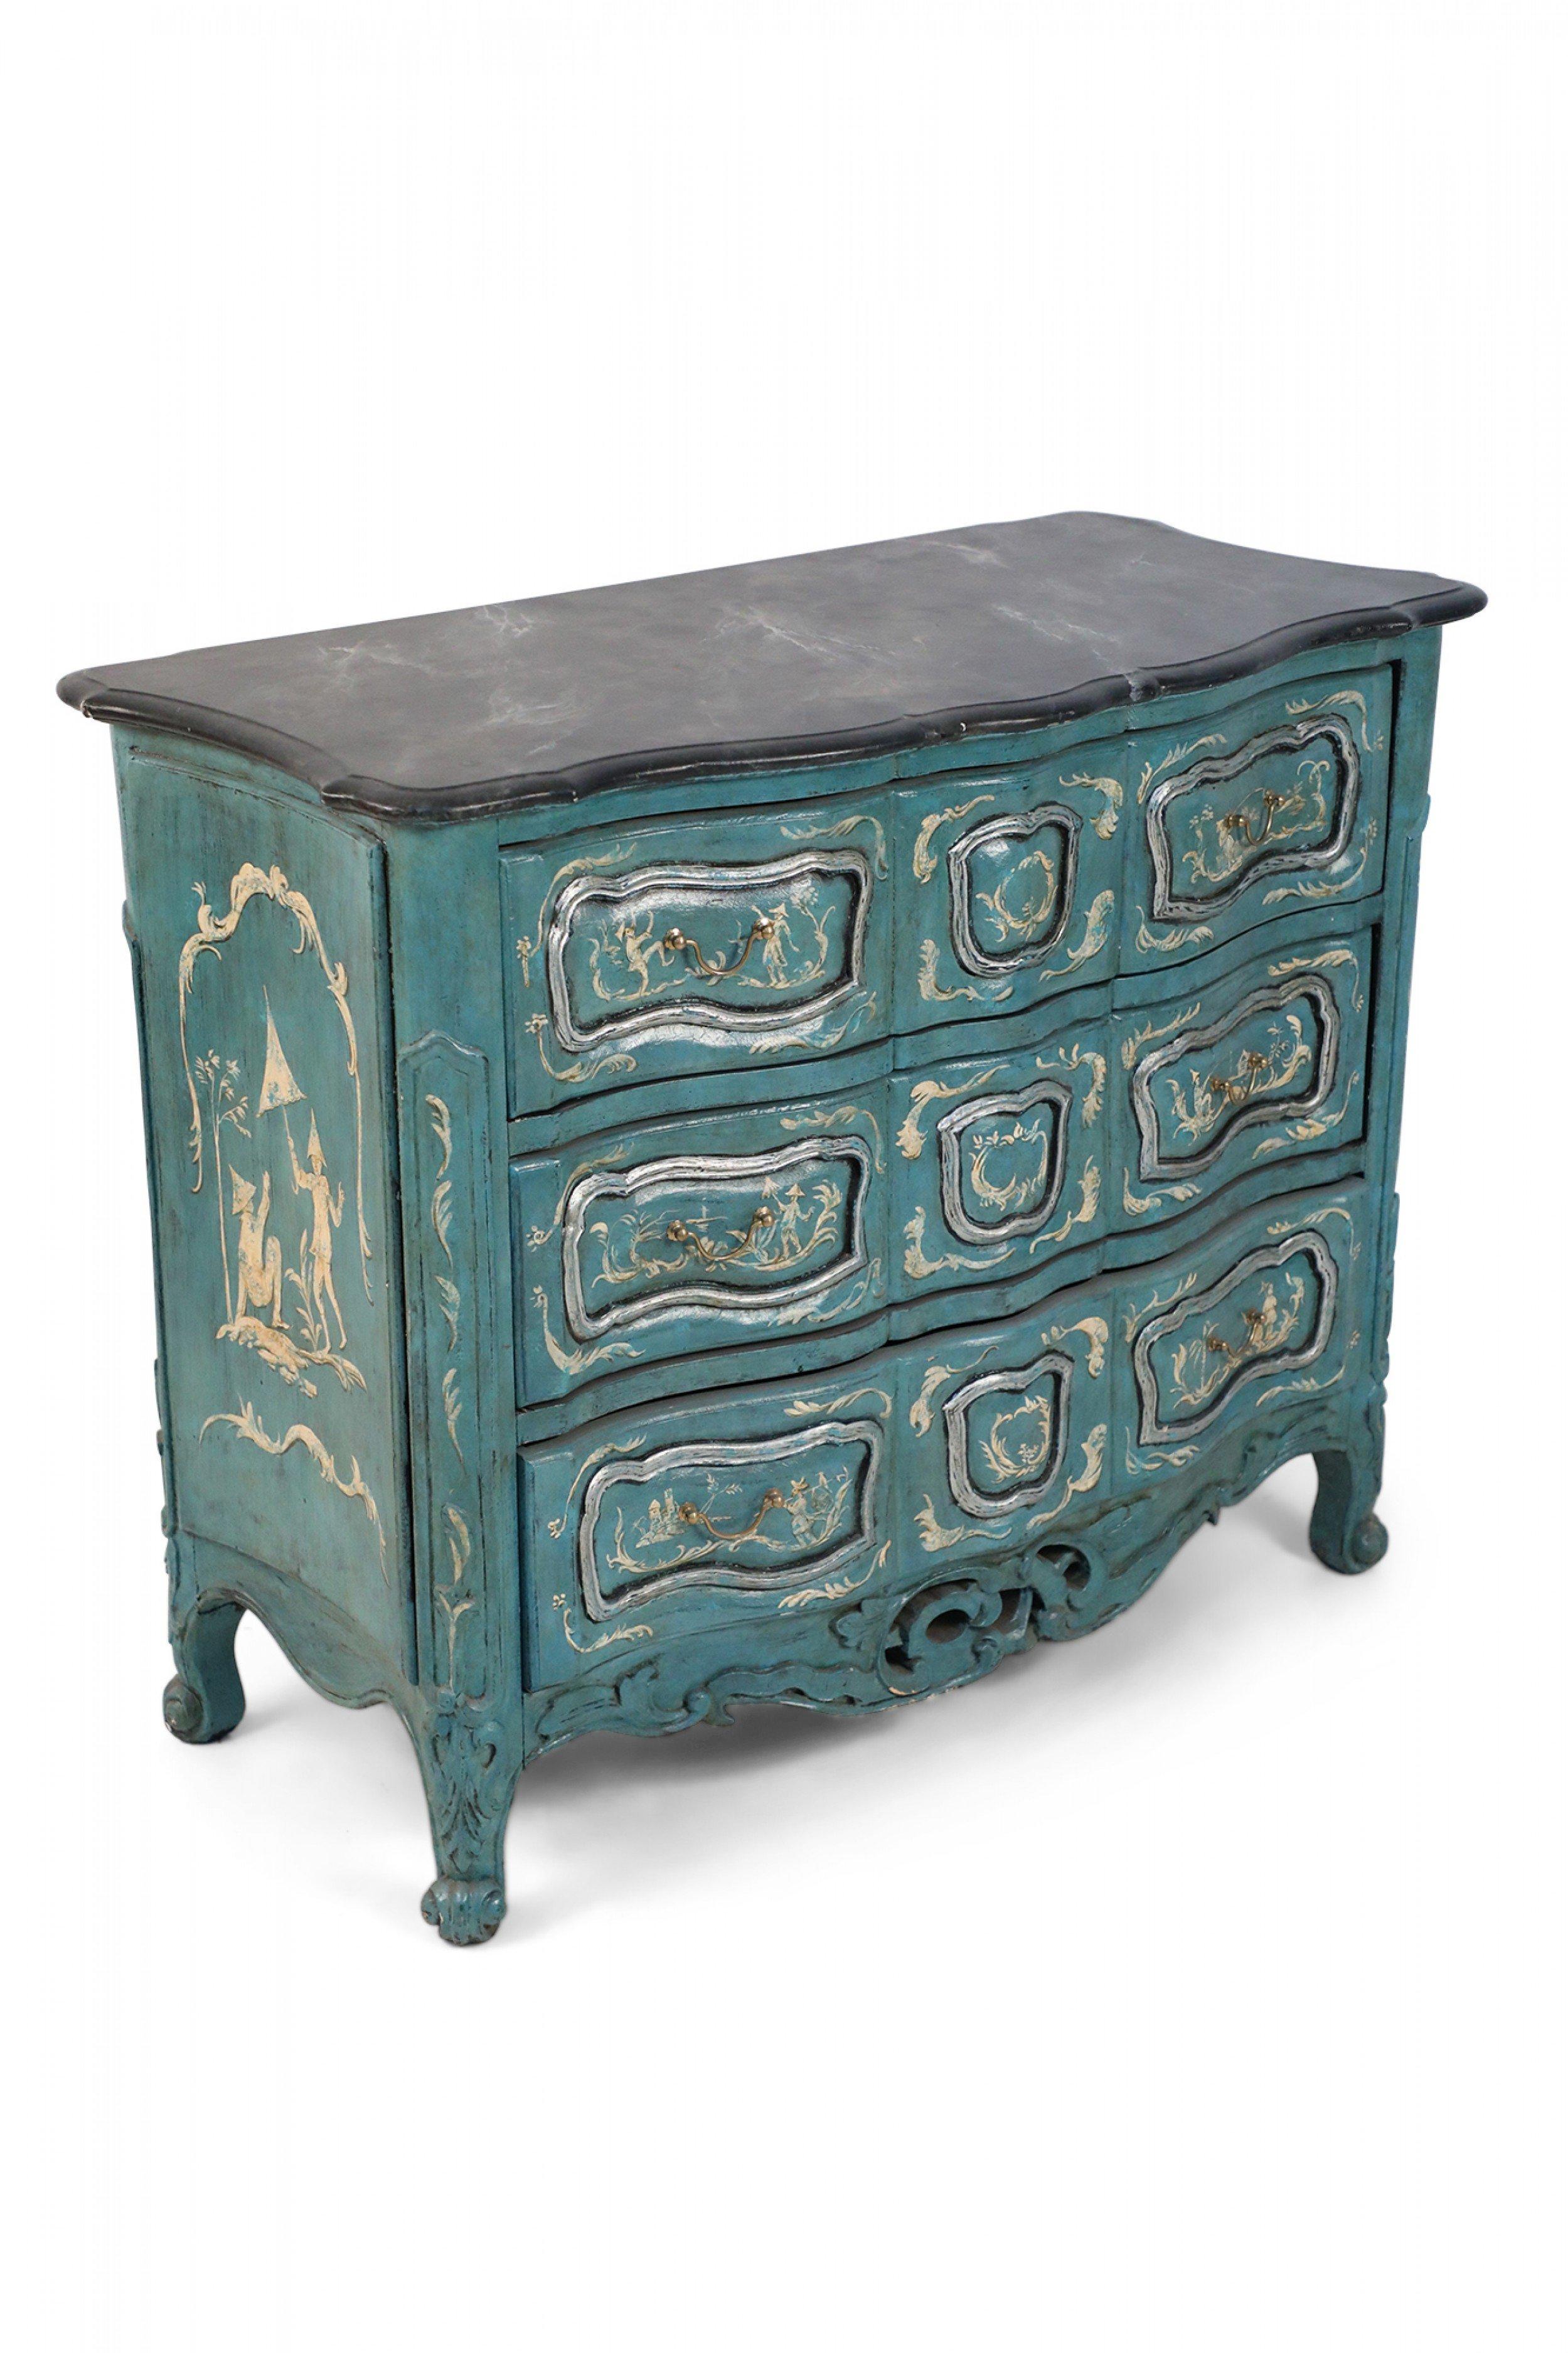 French Louis XV-style serpentine commode that contrasts a smooth, scalloped gray painted faux marble top with a wooden, teal-painted body of undulated drawers with gold pulls and petite, carved cabriole legs with ball feet connected by a carved,